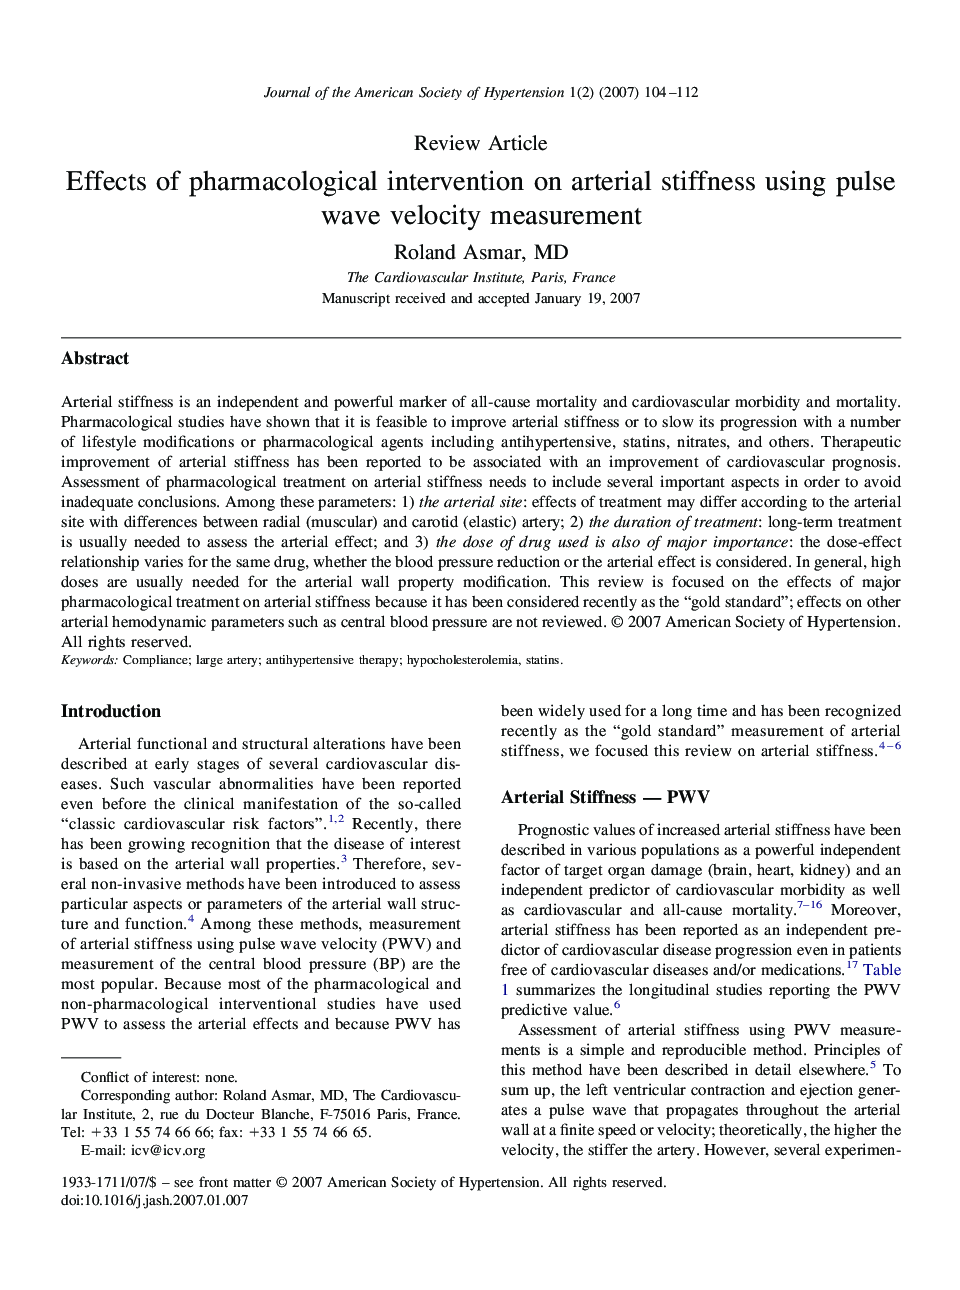 Effects of pharmacological intervention on arterial stiffness using pulse wave velocity measurement 